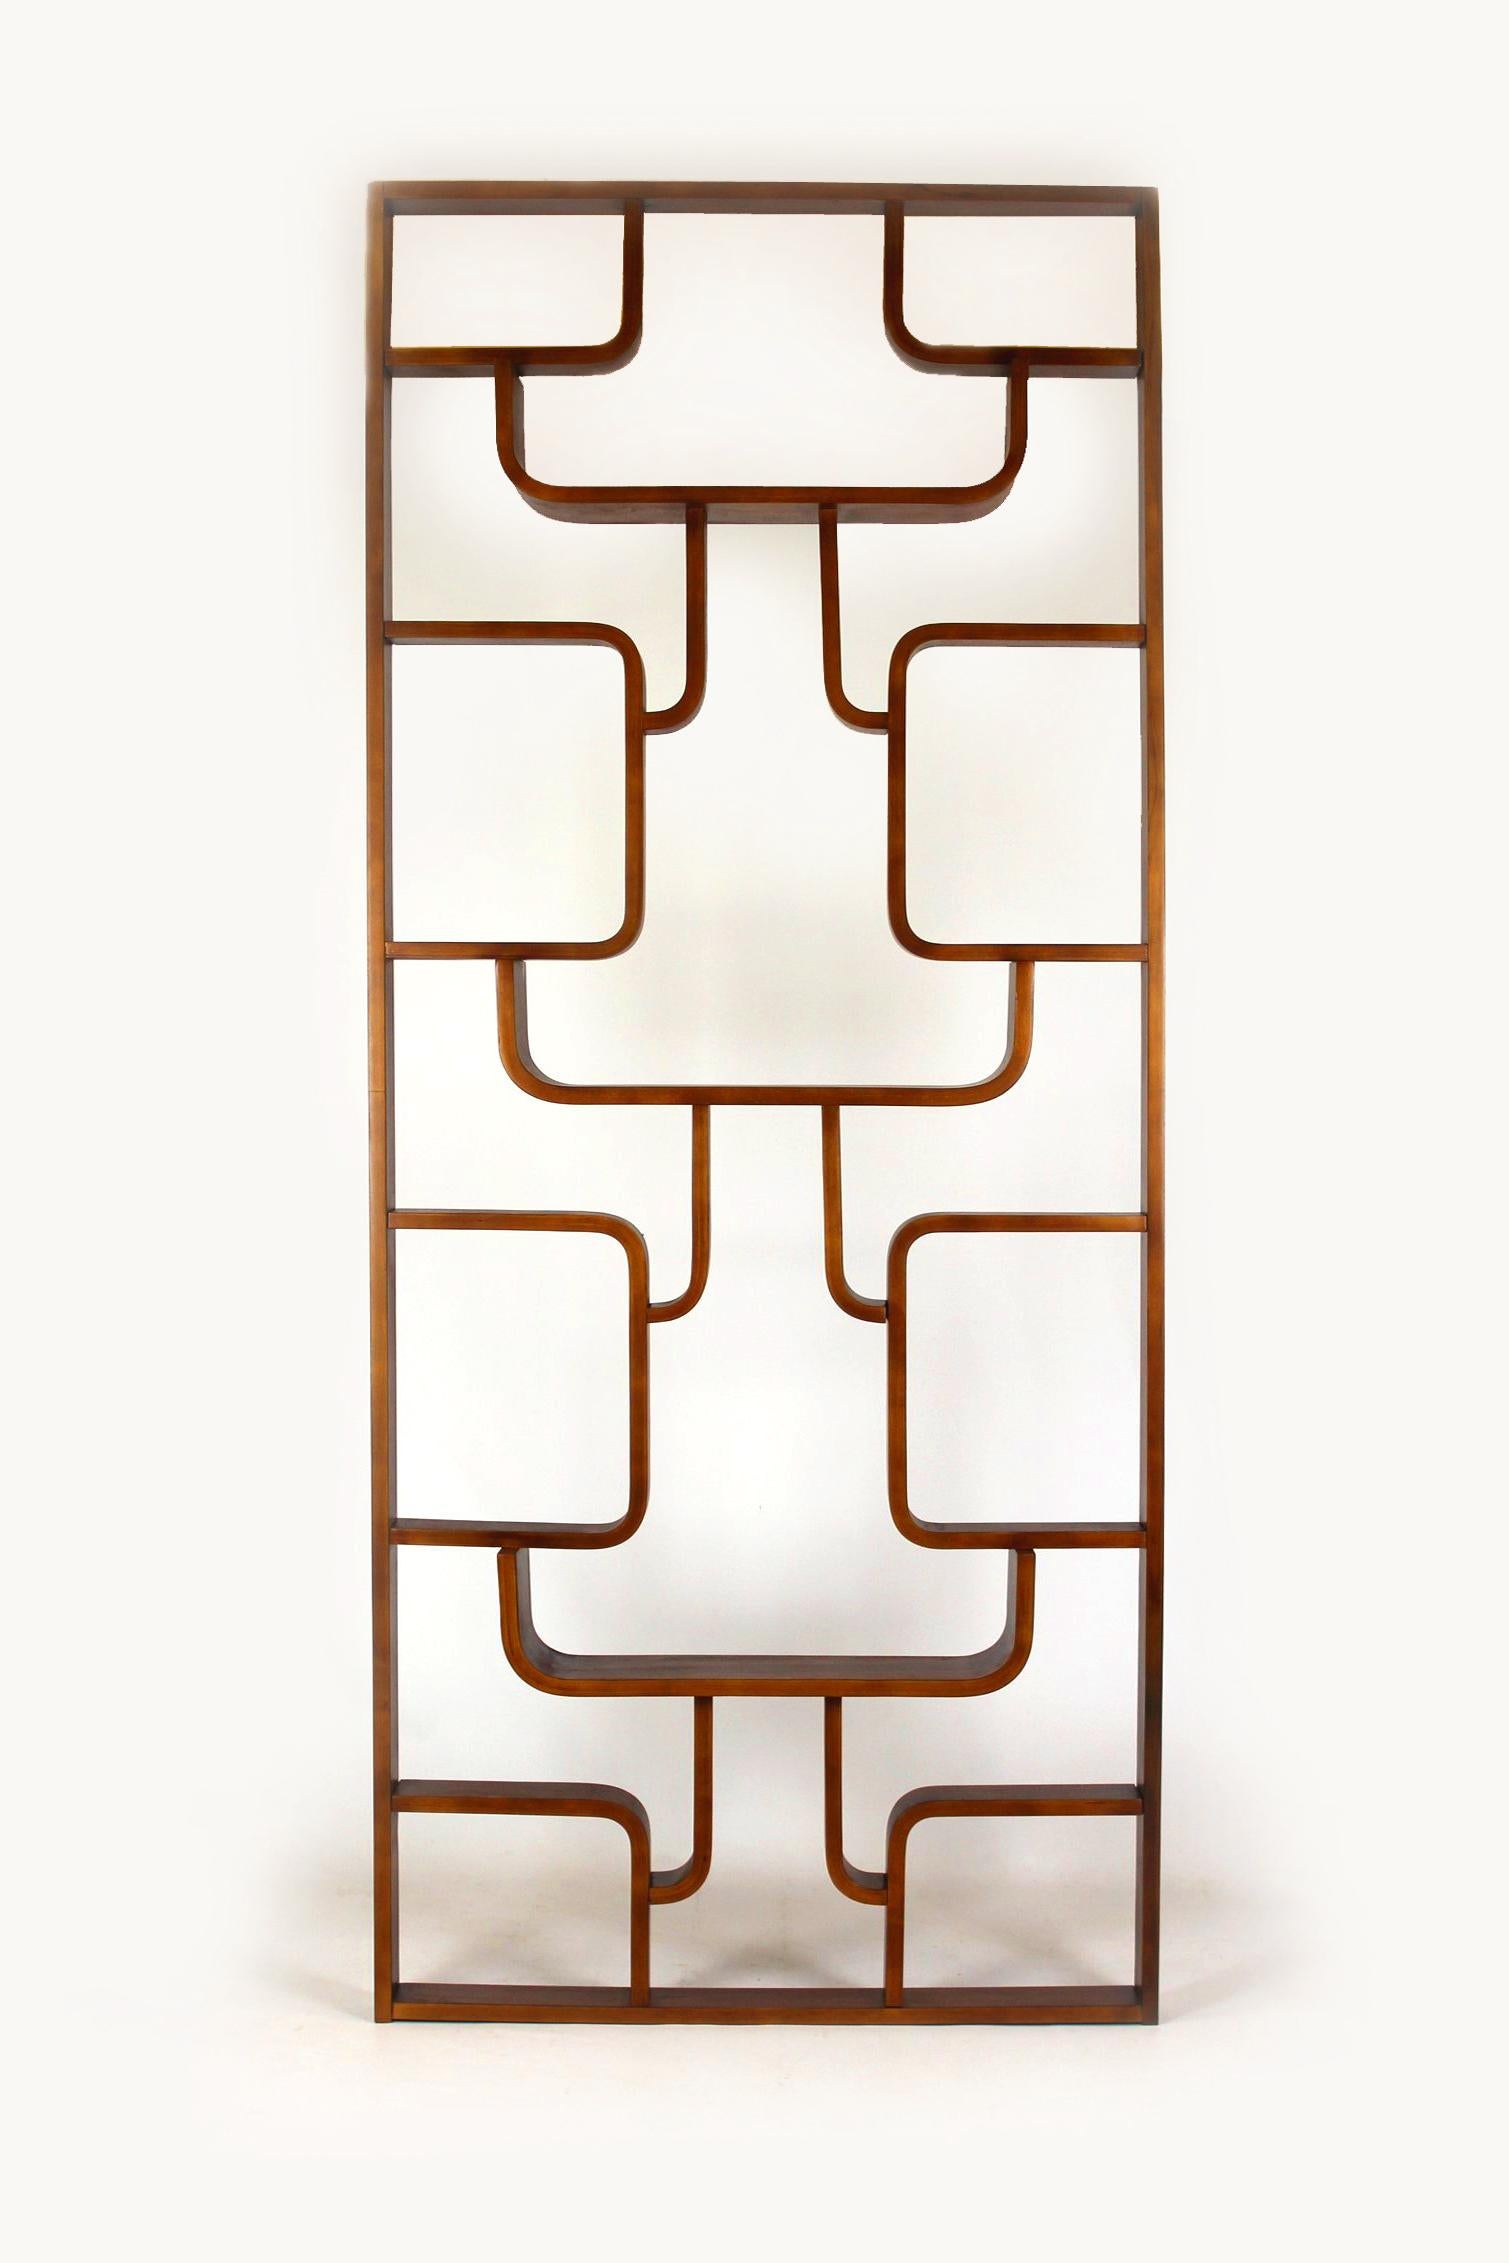 This room divider was designed by Ludvik Volák for Drevopodnik Holešov in the 1960s.
It has been completely restored, varnished in a satin finish.
